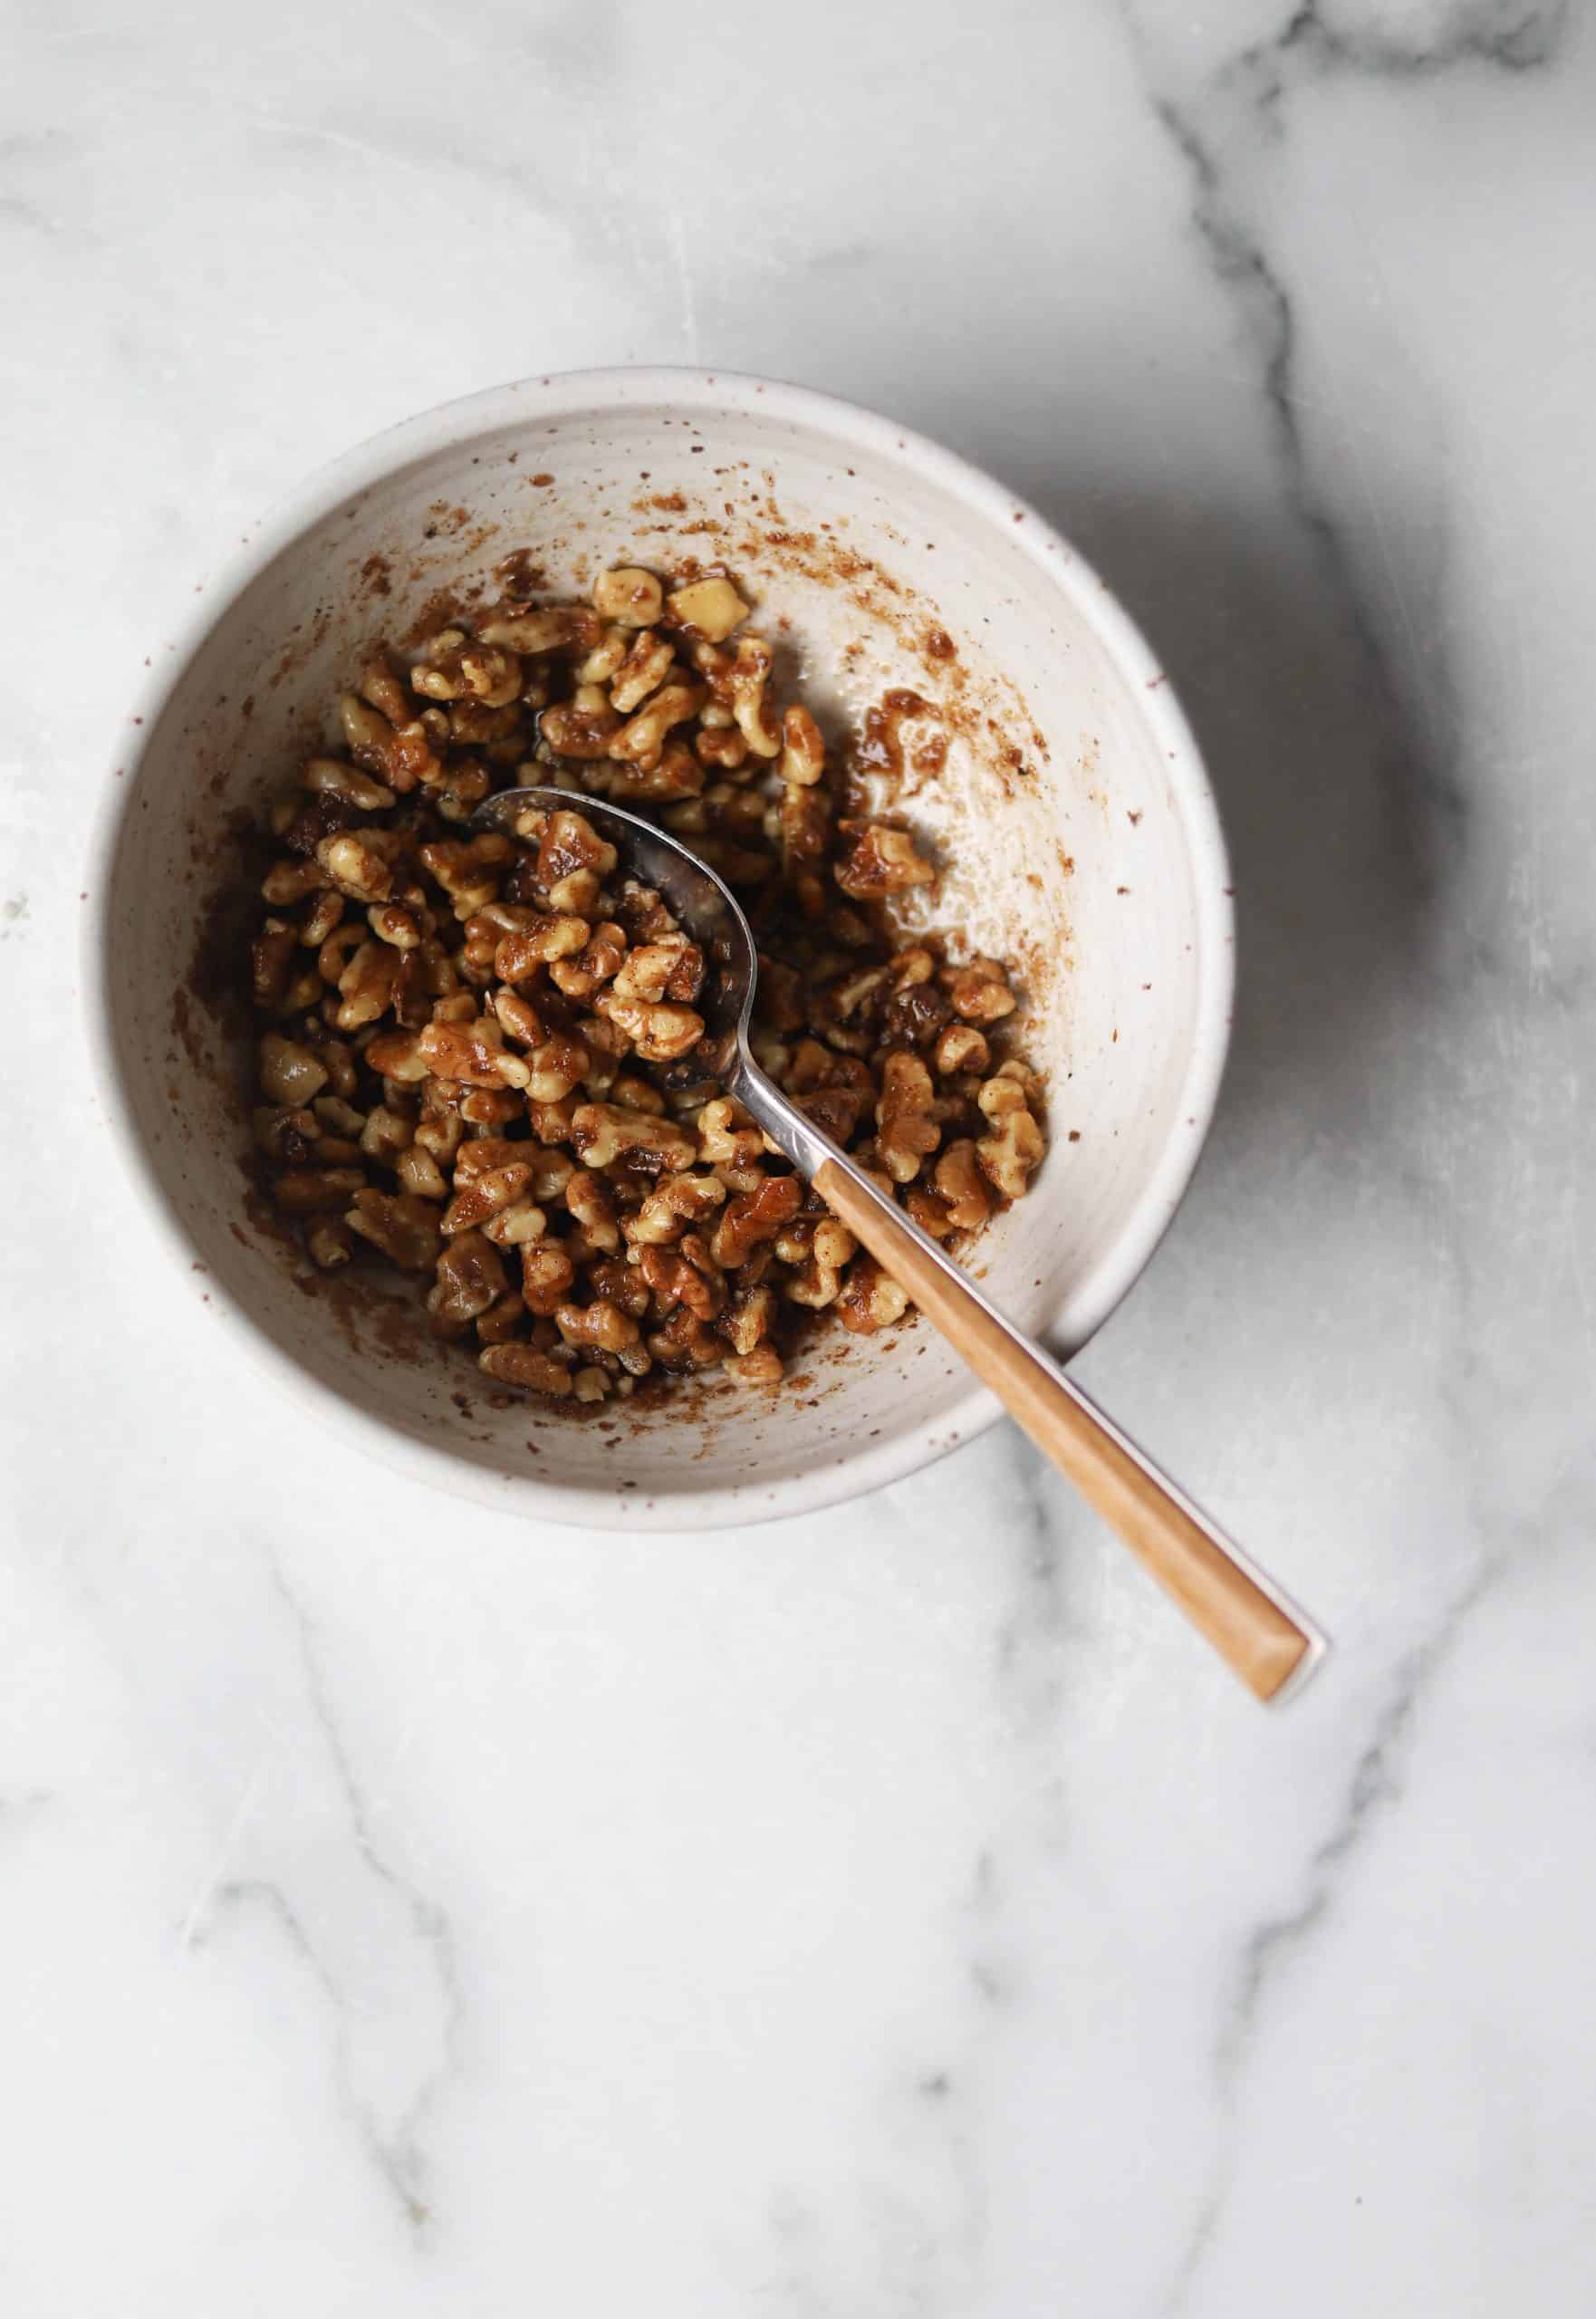 Walnut crumble in a speckled bowl